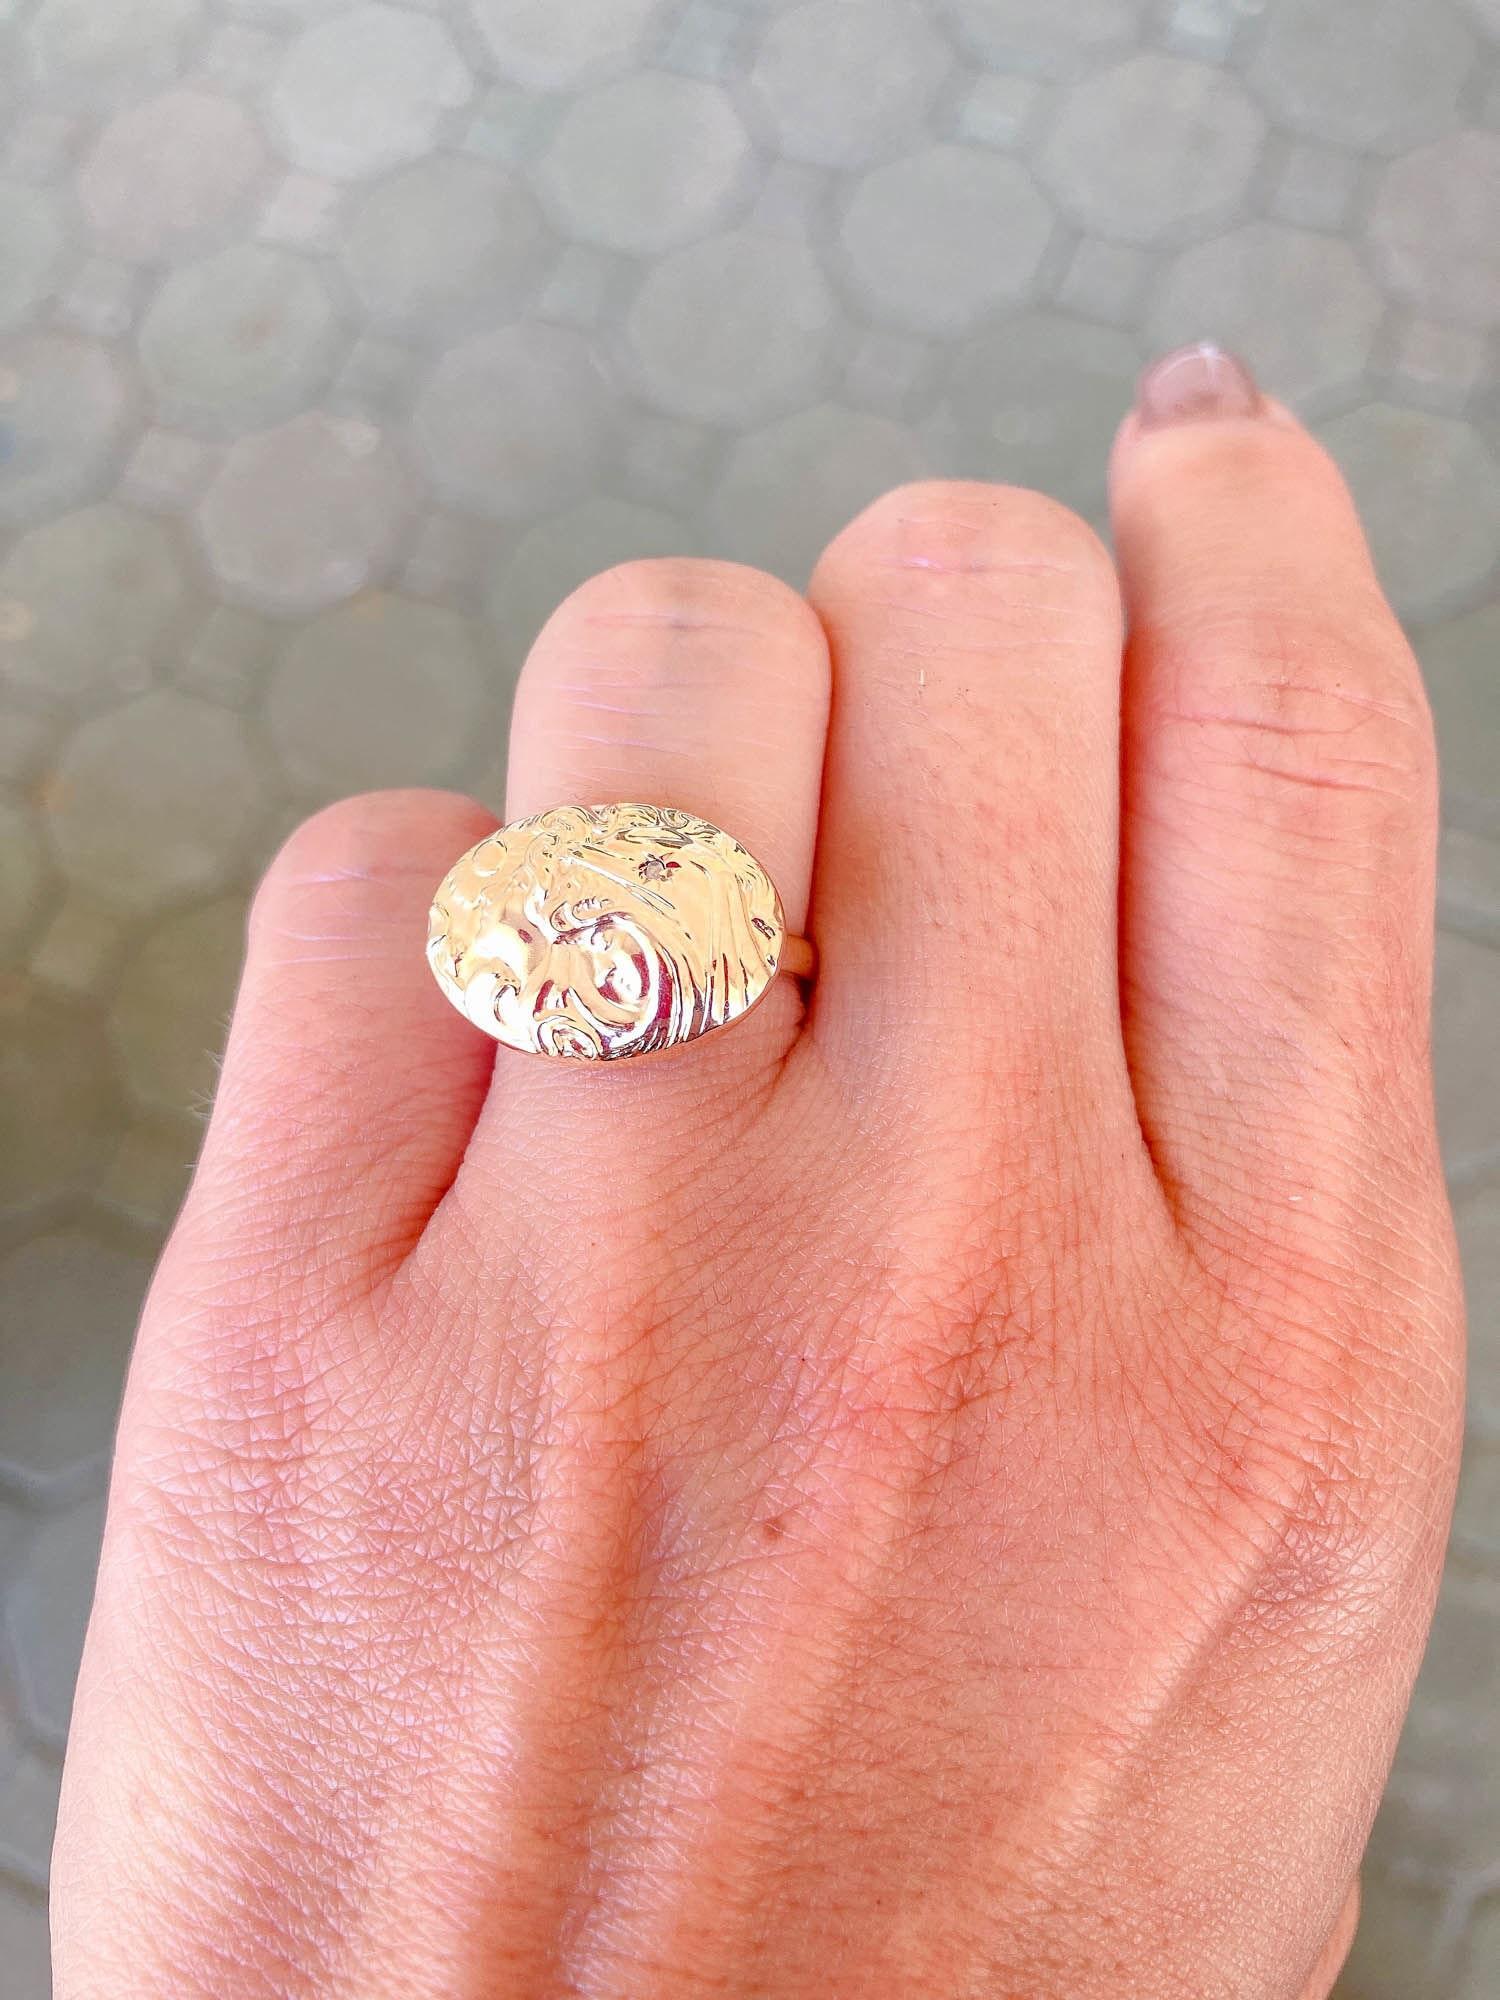 Victorian Art Nouveau Woman Face Diamond Repousse Ring 14K Yellow Gold R6280 In New Condition For Sale In Osprey, FL